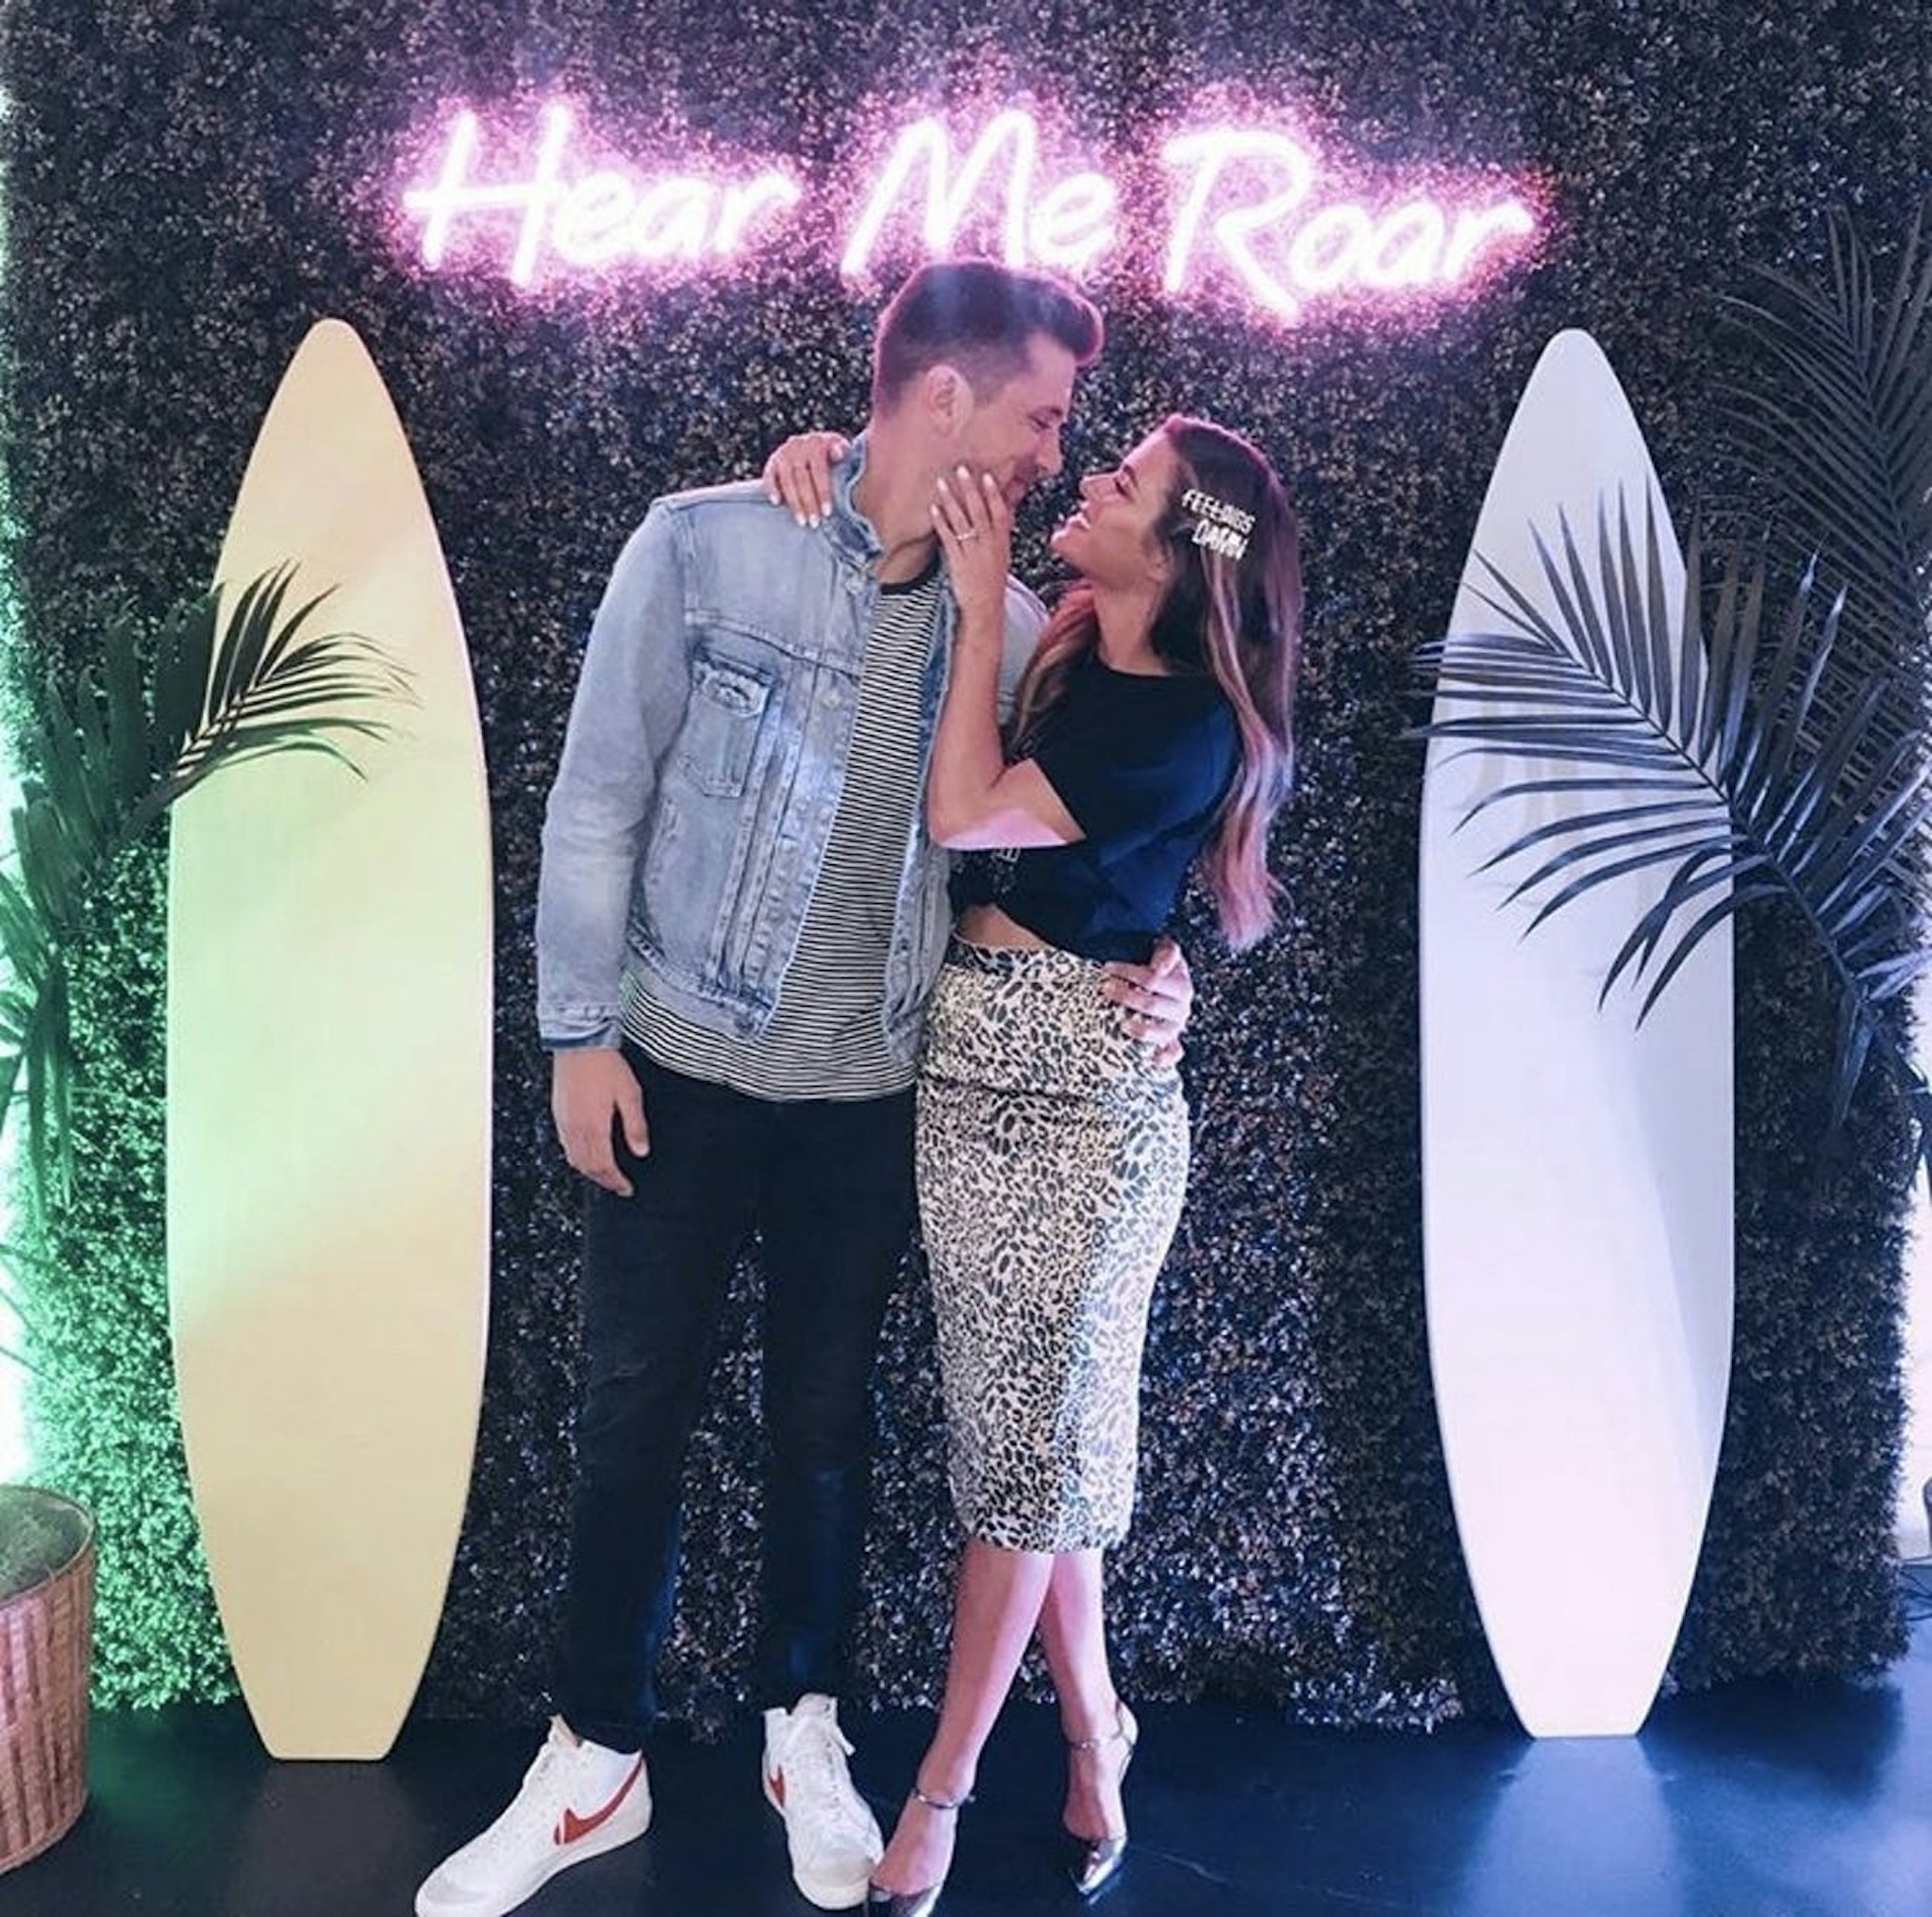 Jojo Fletcher and Jordan Rodgers at Shop Fletch pop up shop in Chicago posing in front of branded living wall